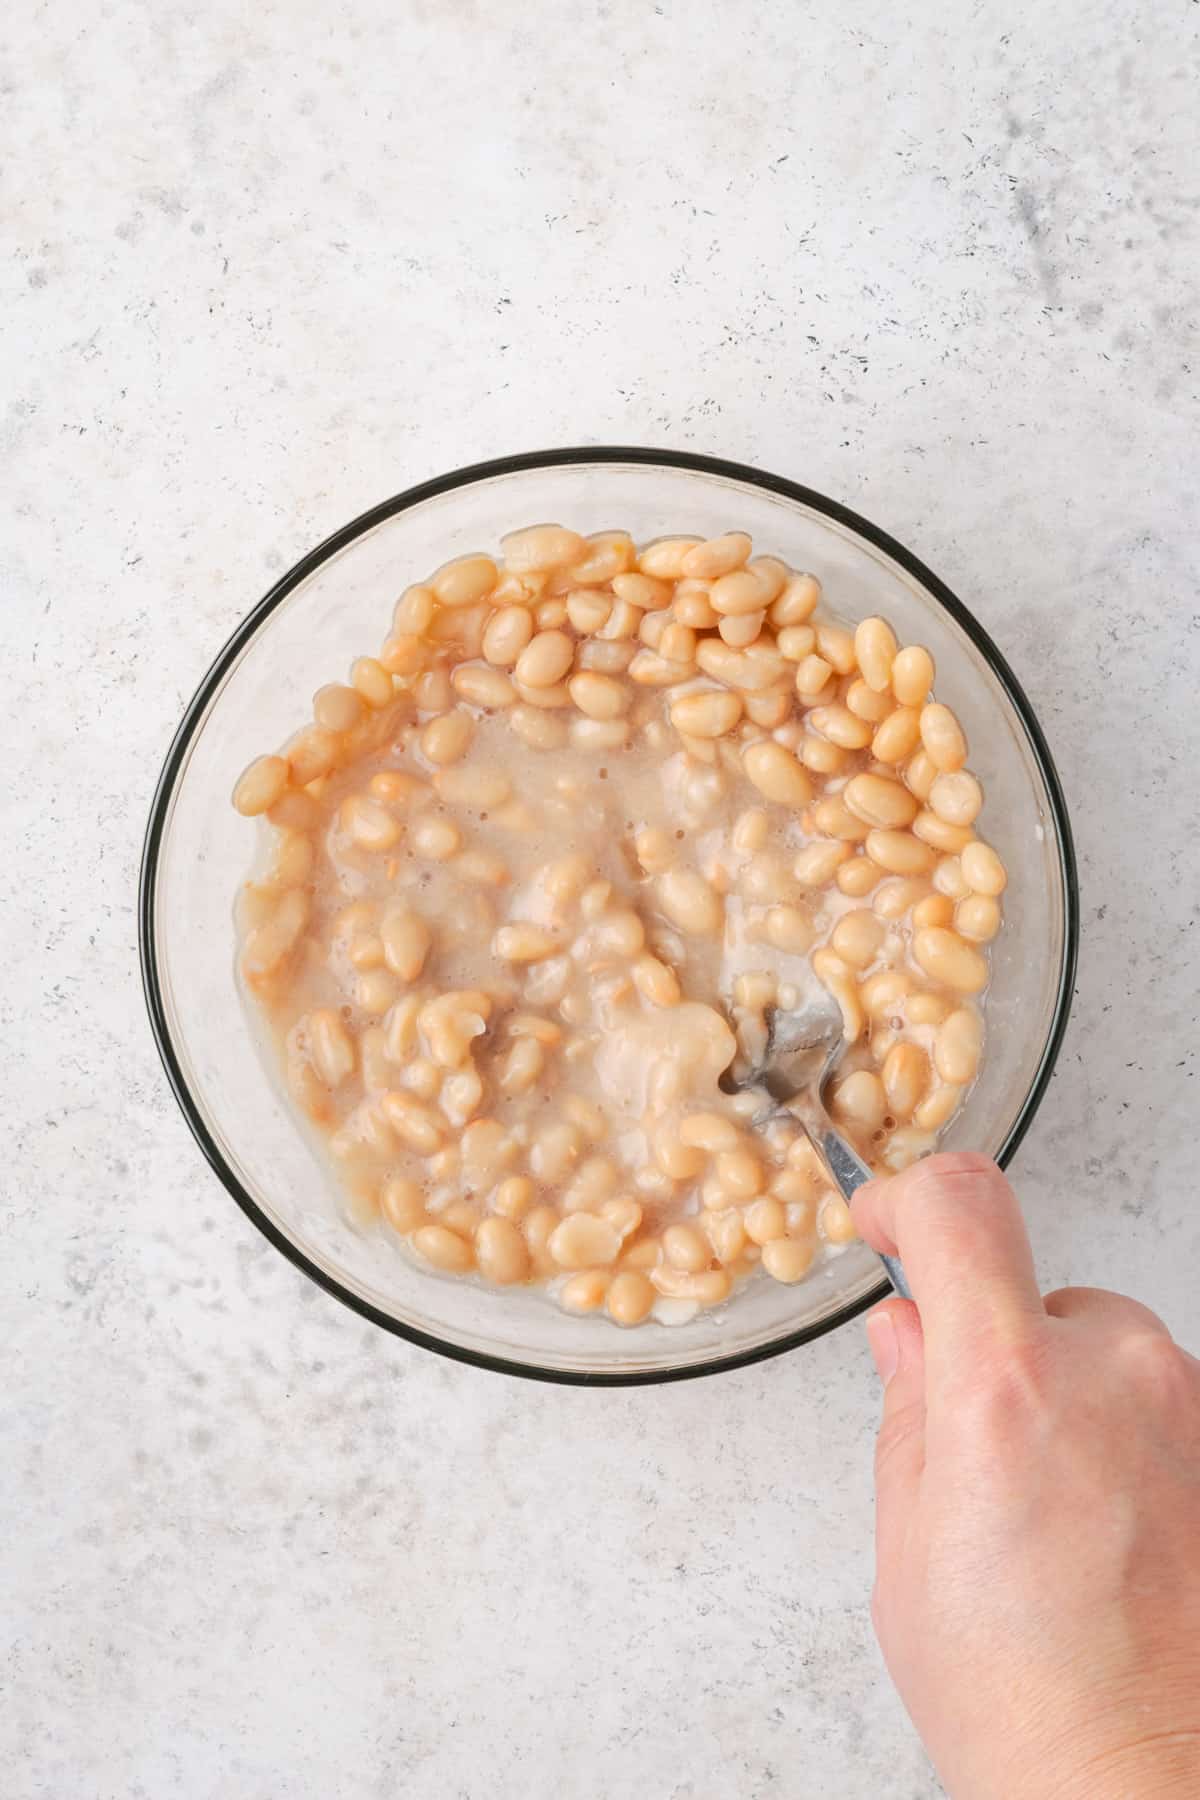 A can of navy beans being mashed with a fork in a small bowl.